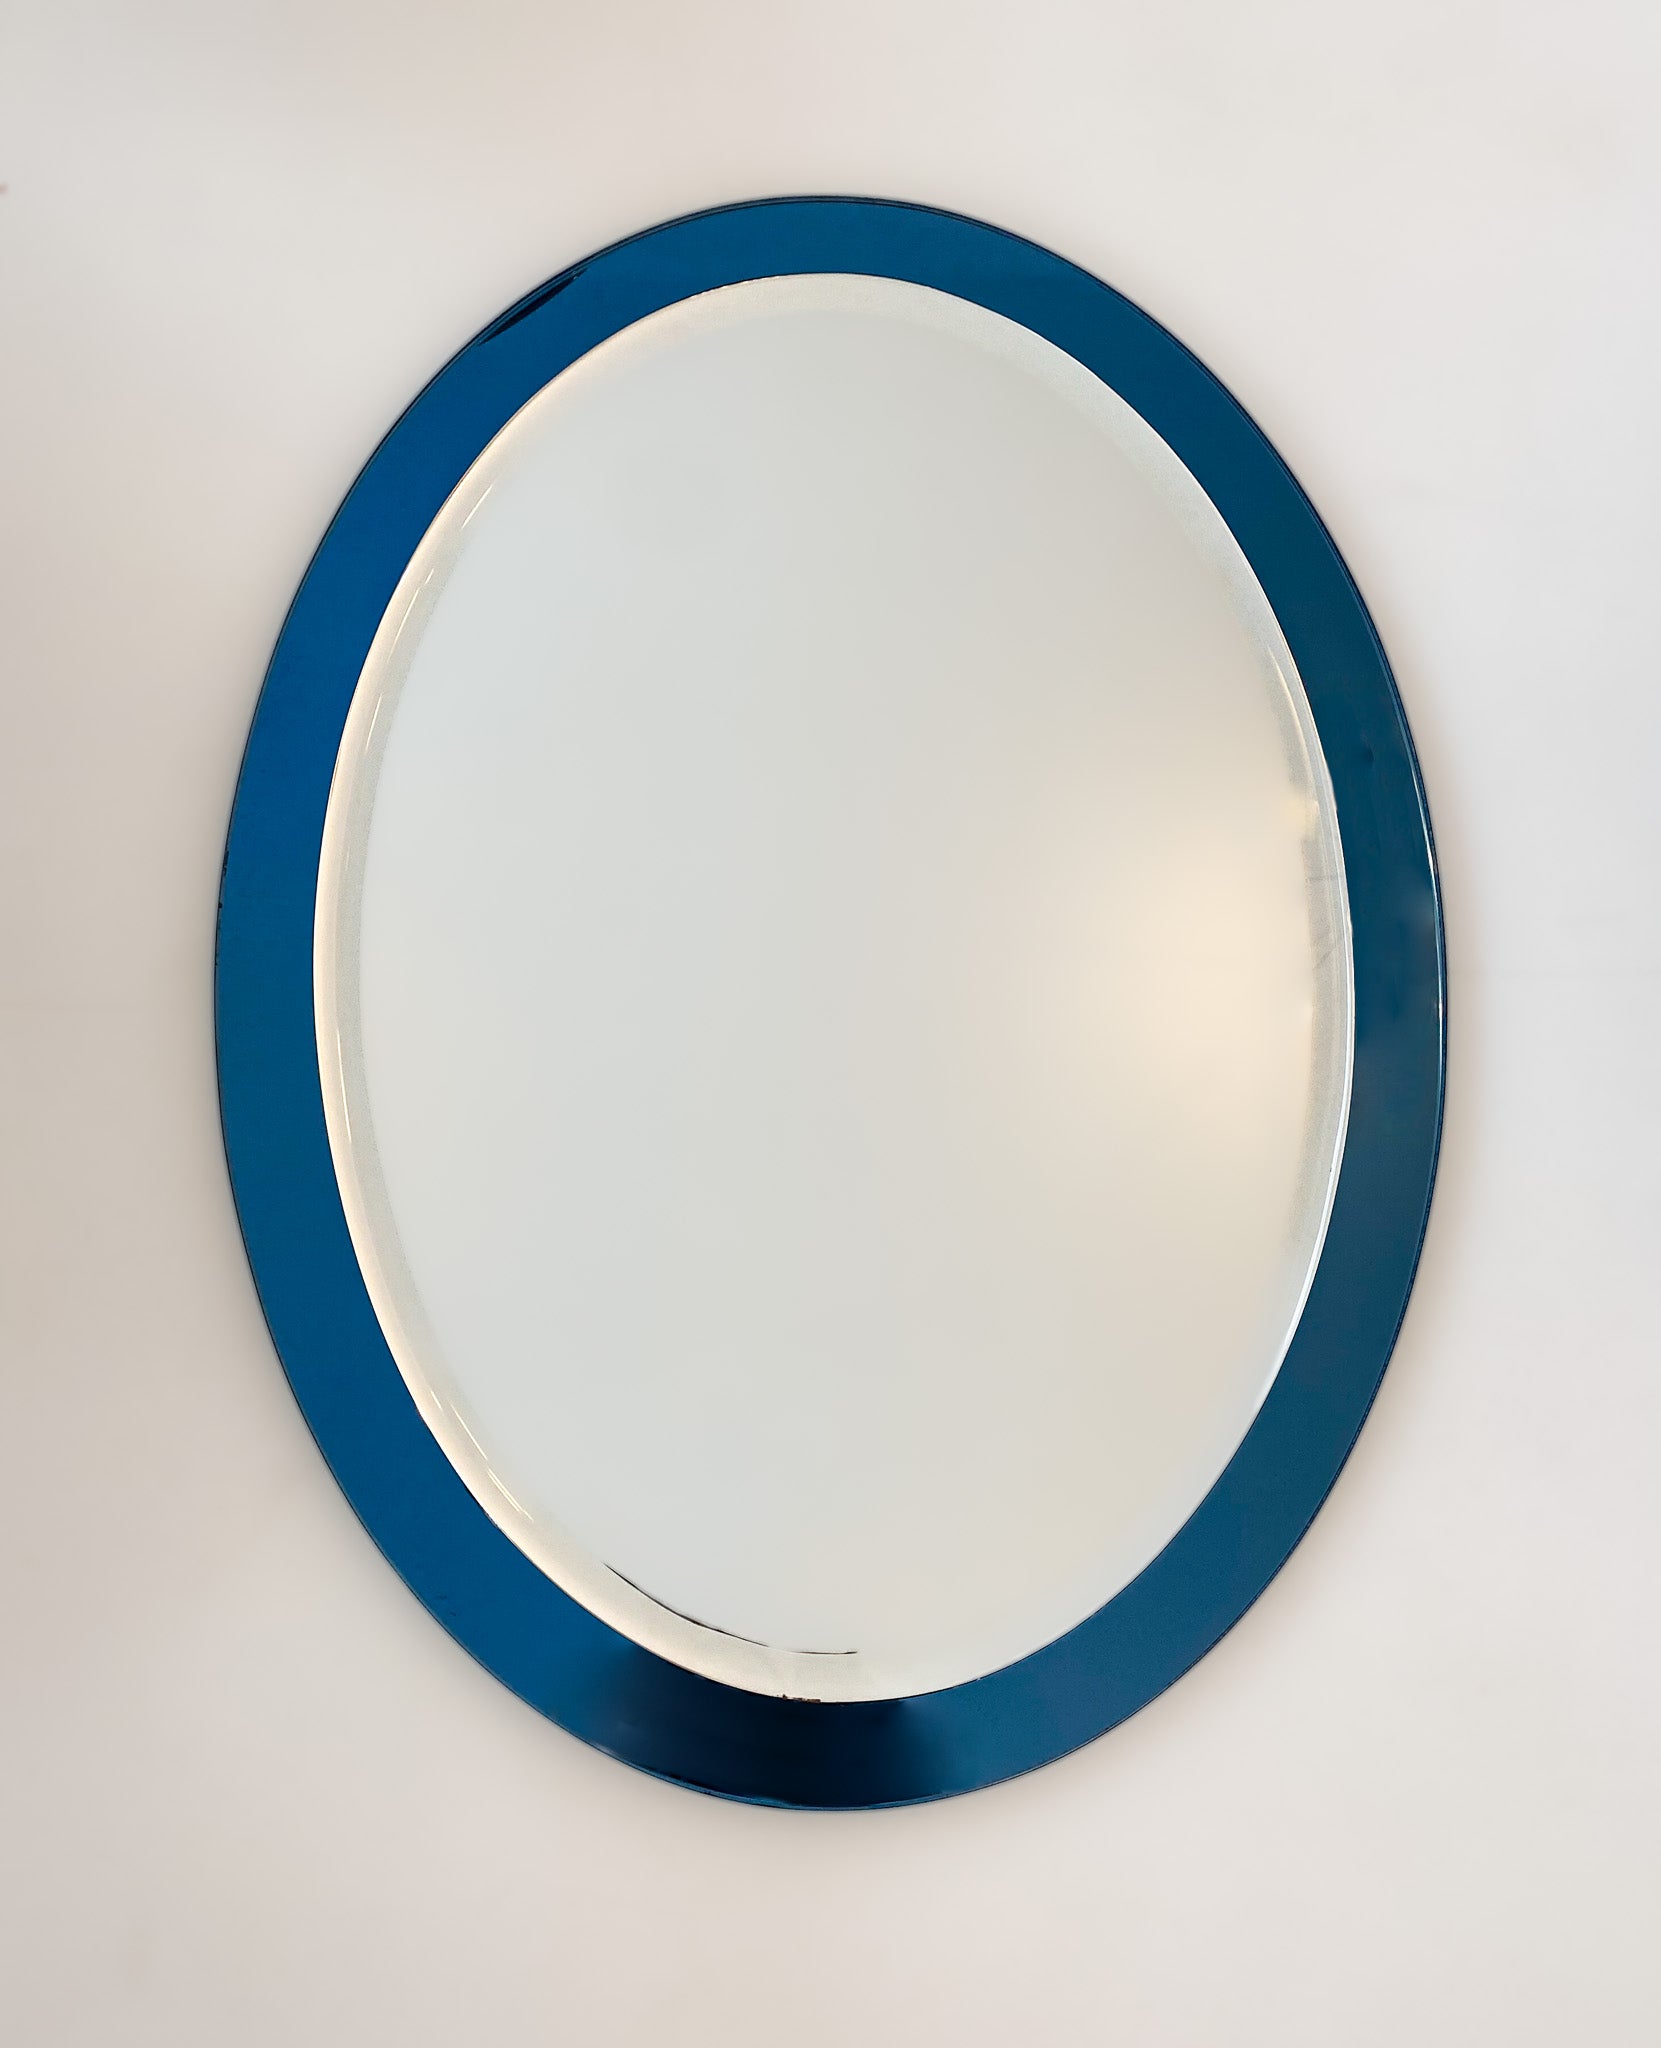 Mid-Century Modern blue oval glass wall mirror, Italy 1970s.

Elegant Mid-Century Modern blue Italian oval shaped wall mirror from the 70s. This wall mirror has a unique frame of deep blue mirrored glass. The mirror itself has a beautiful polished